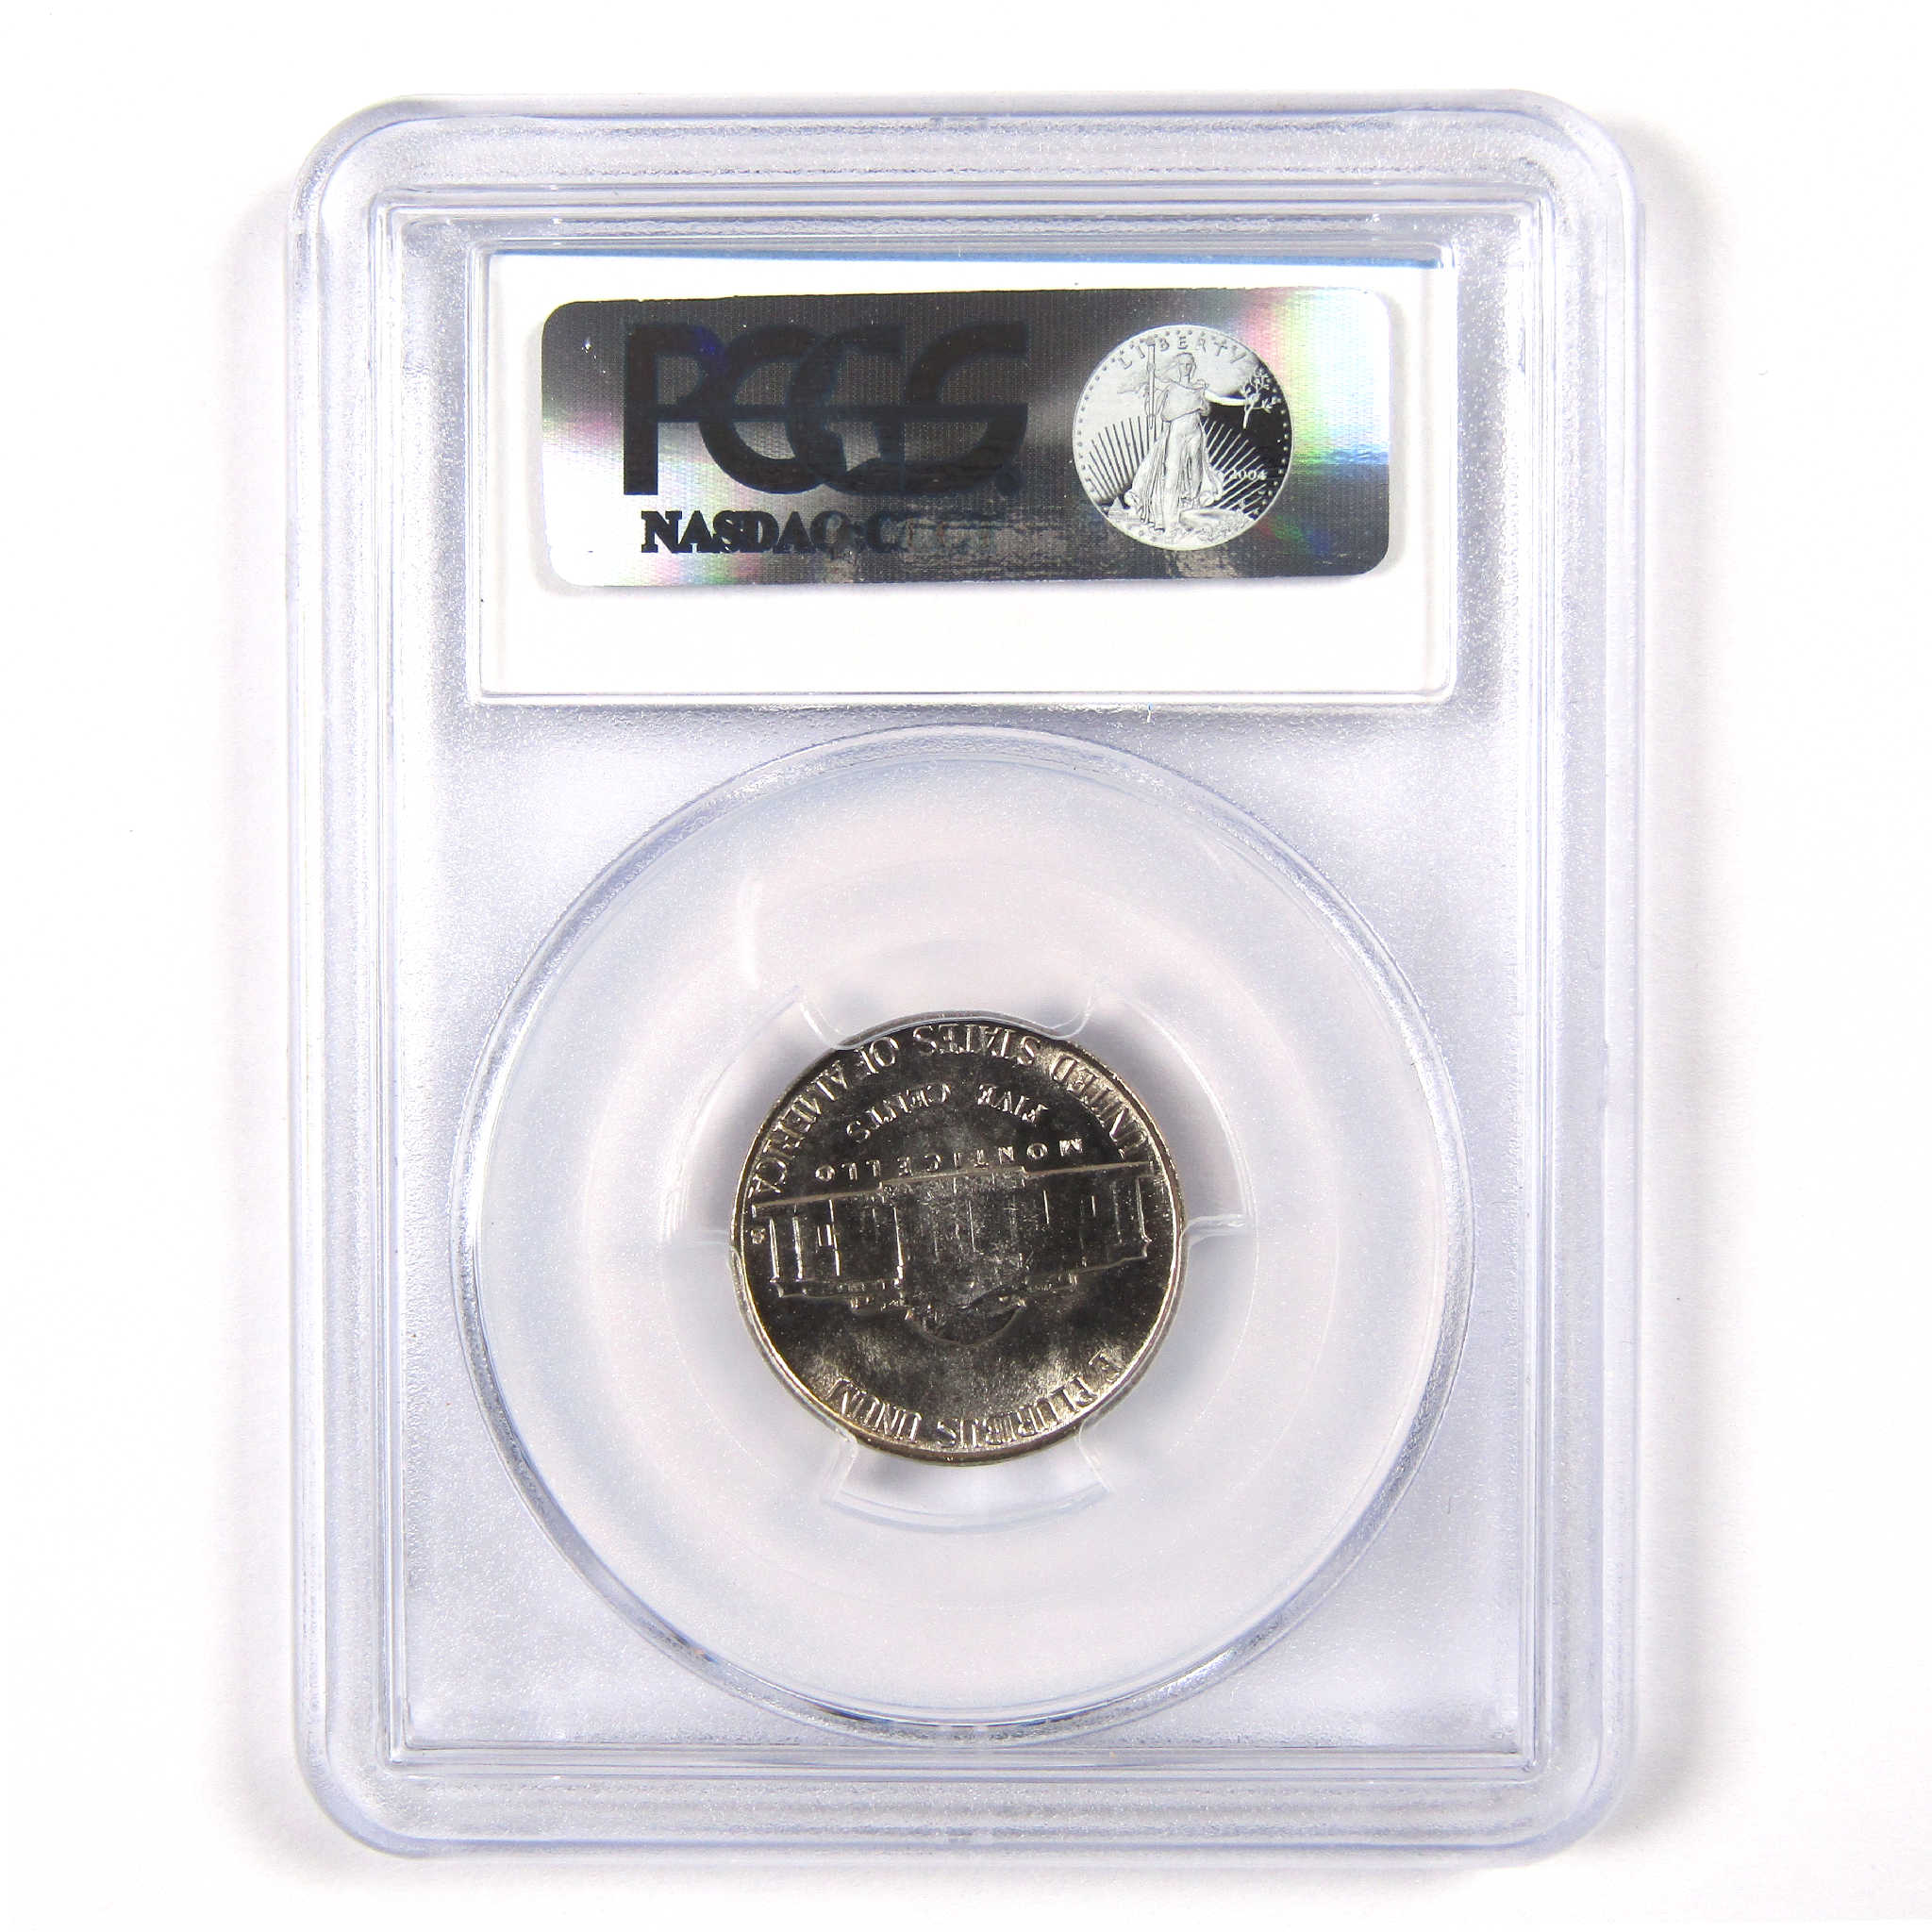 1953 S Jefferson Nickel MS 65 PCGS 5c Uncirculated Coin SKU:CPC5210